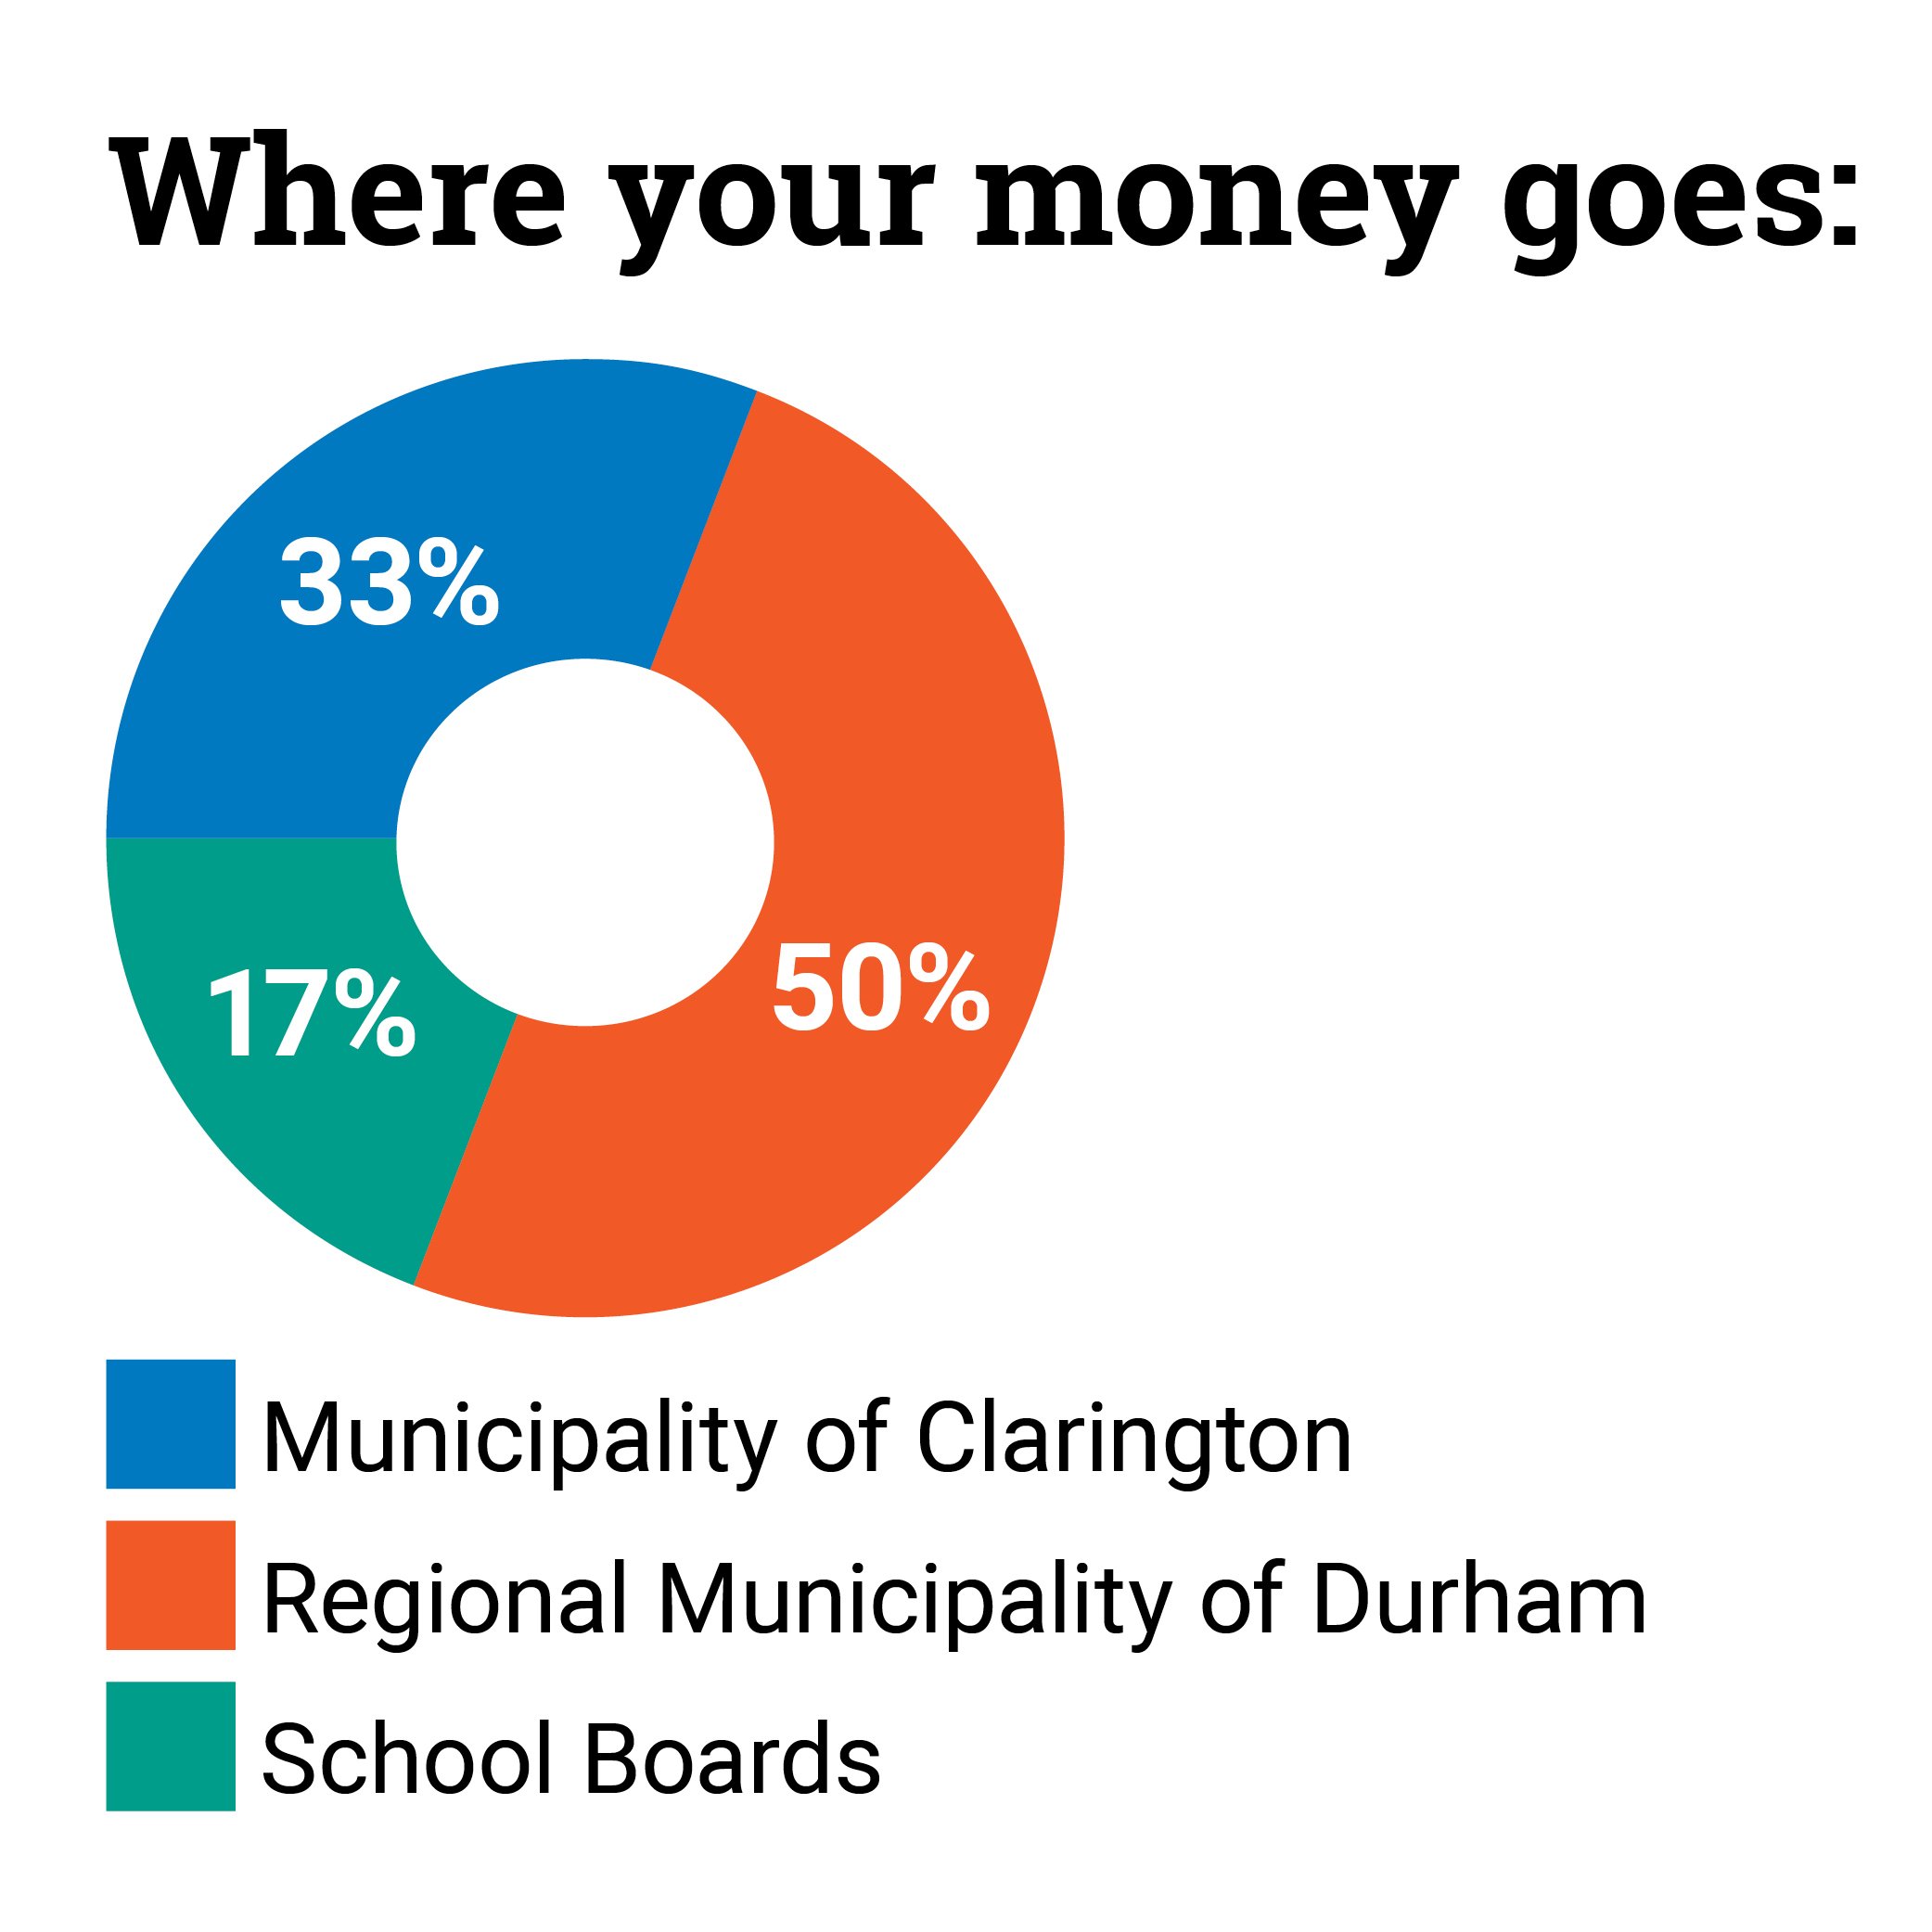 Graph showing where your money goes: 49% Region of Durham, 33% Clarington, 18% School Boards